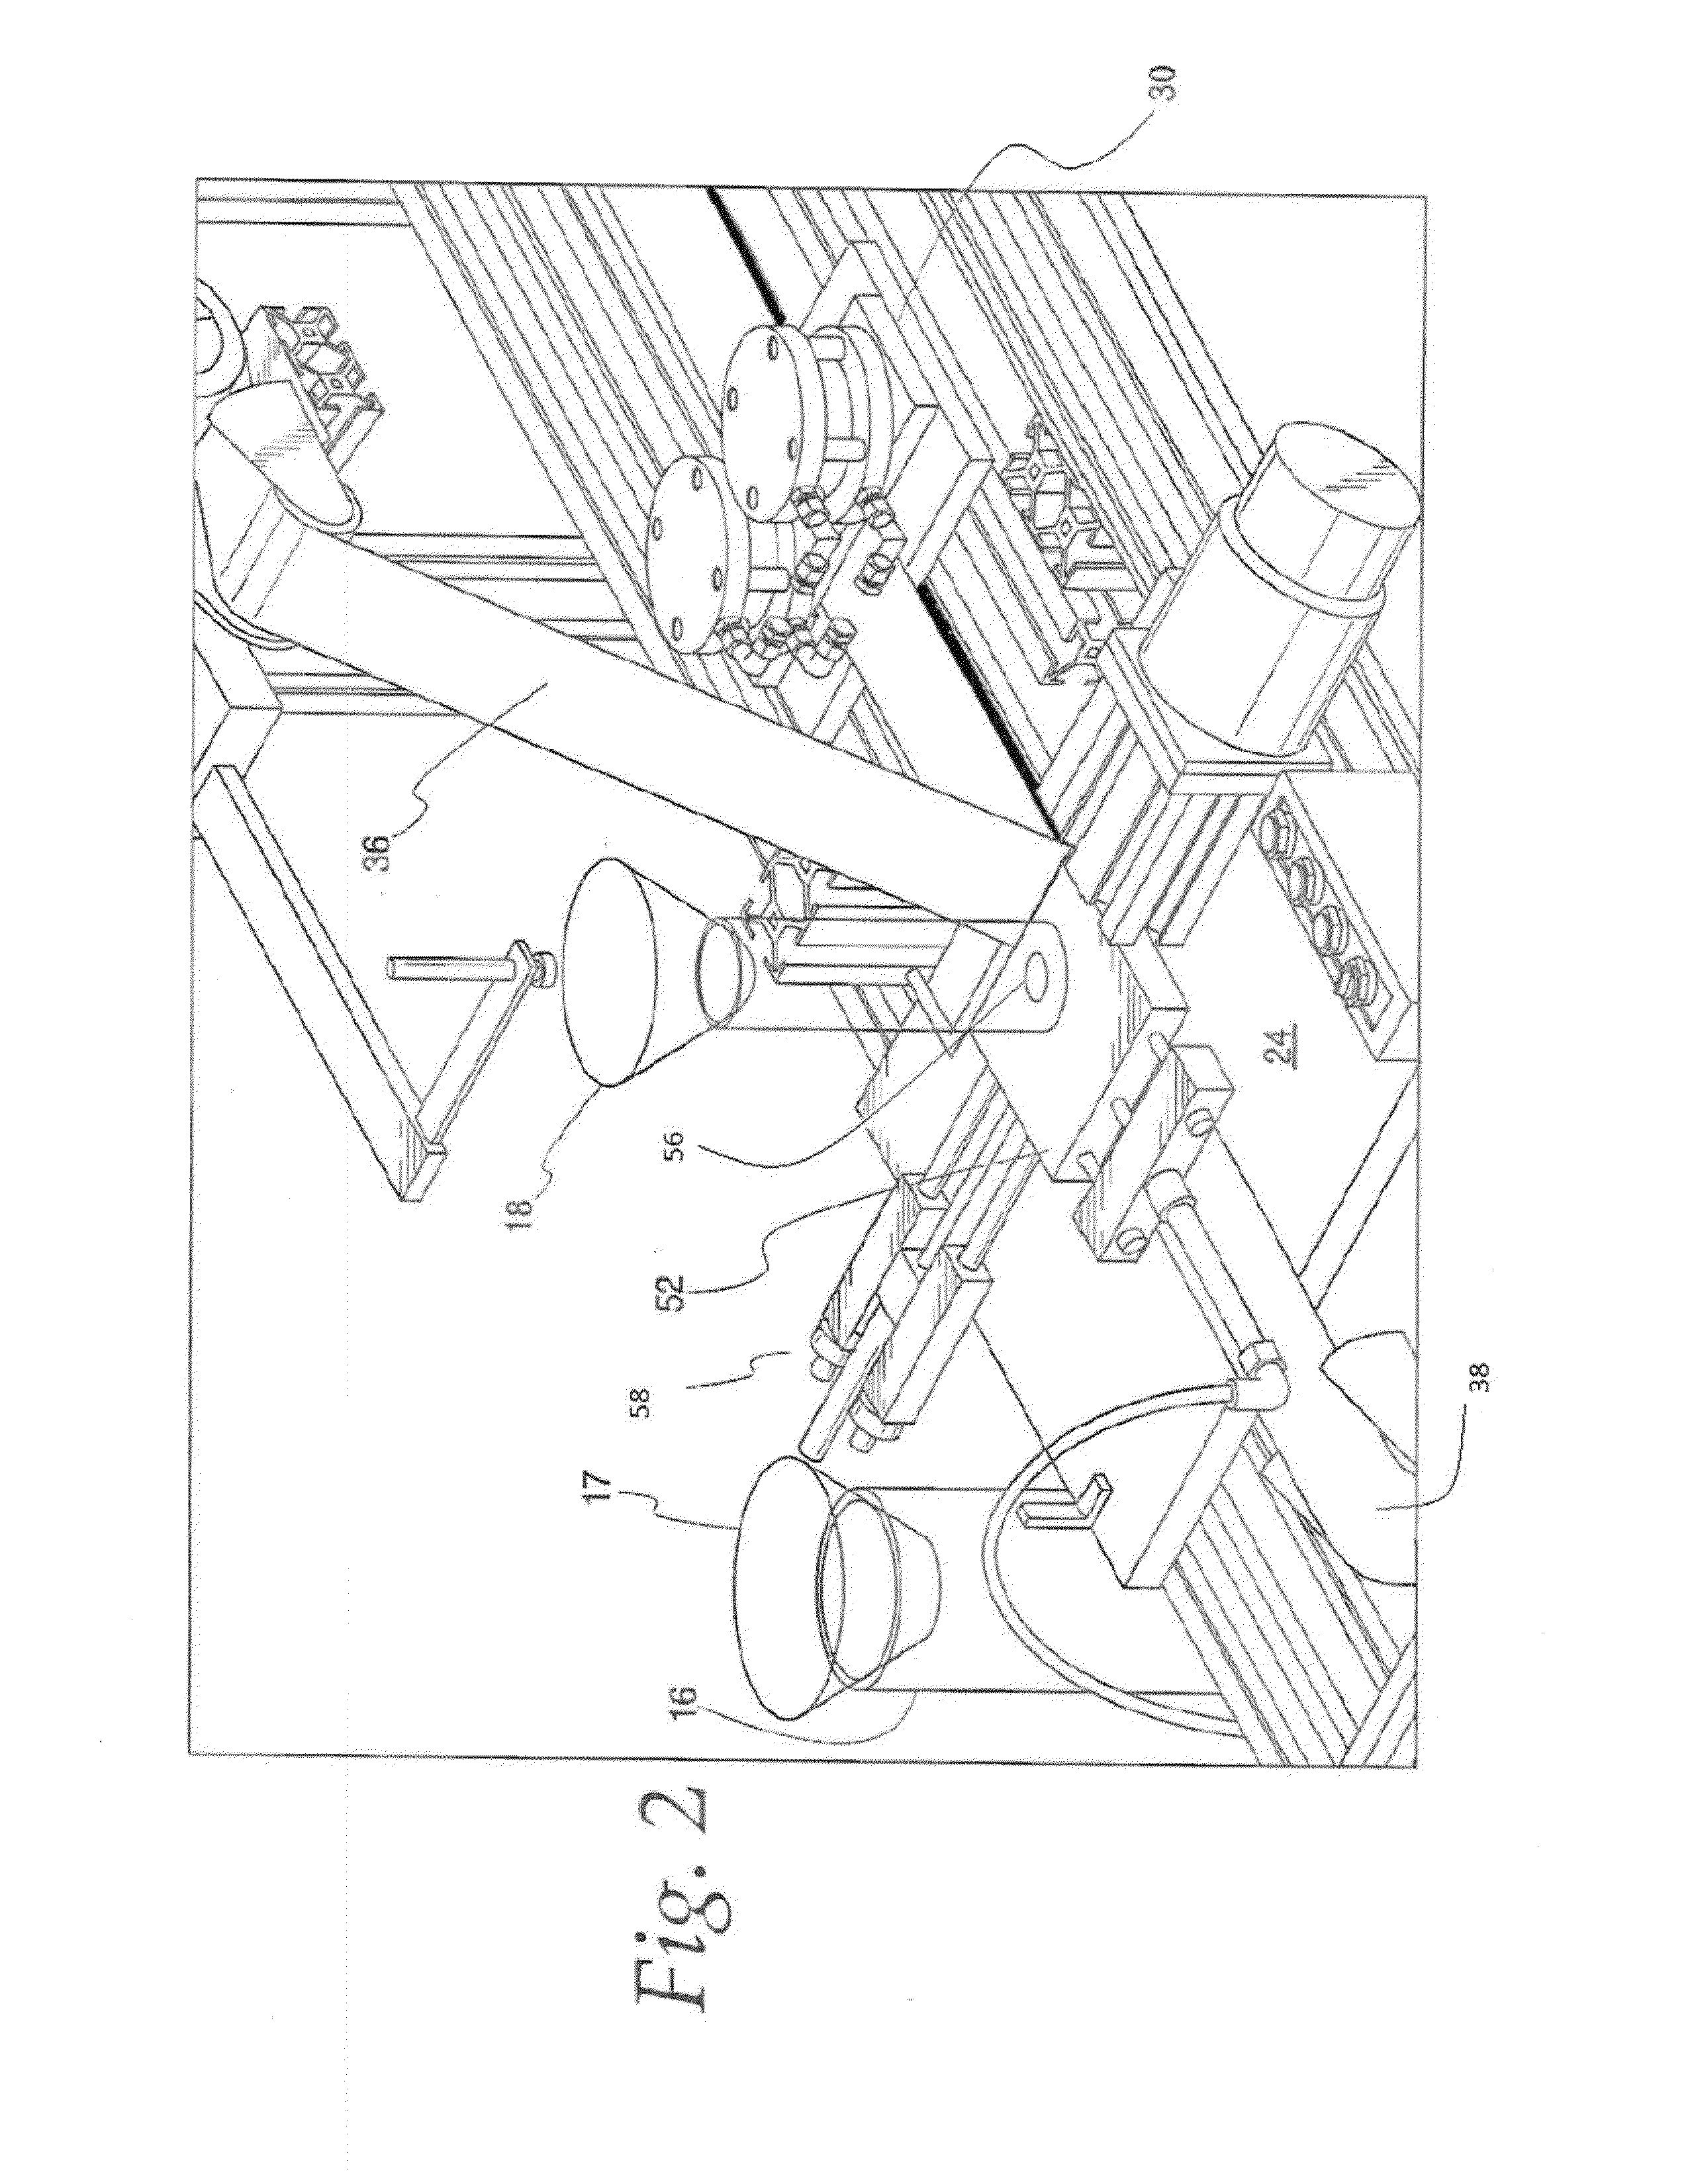 Apparatus for packaging arthropods infected with entomopathogenic nematodes